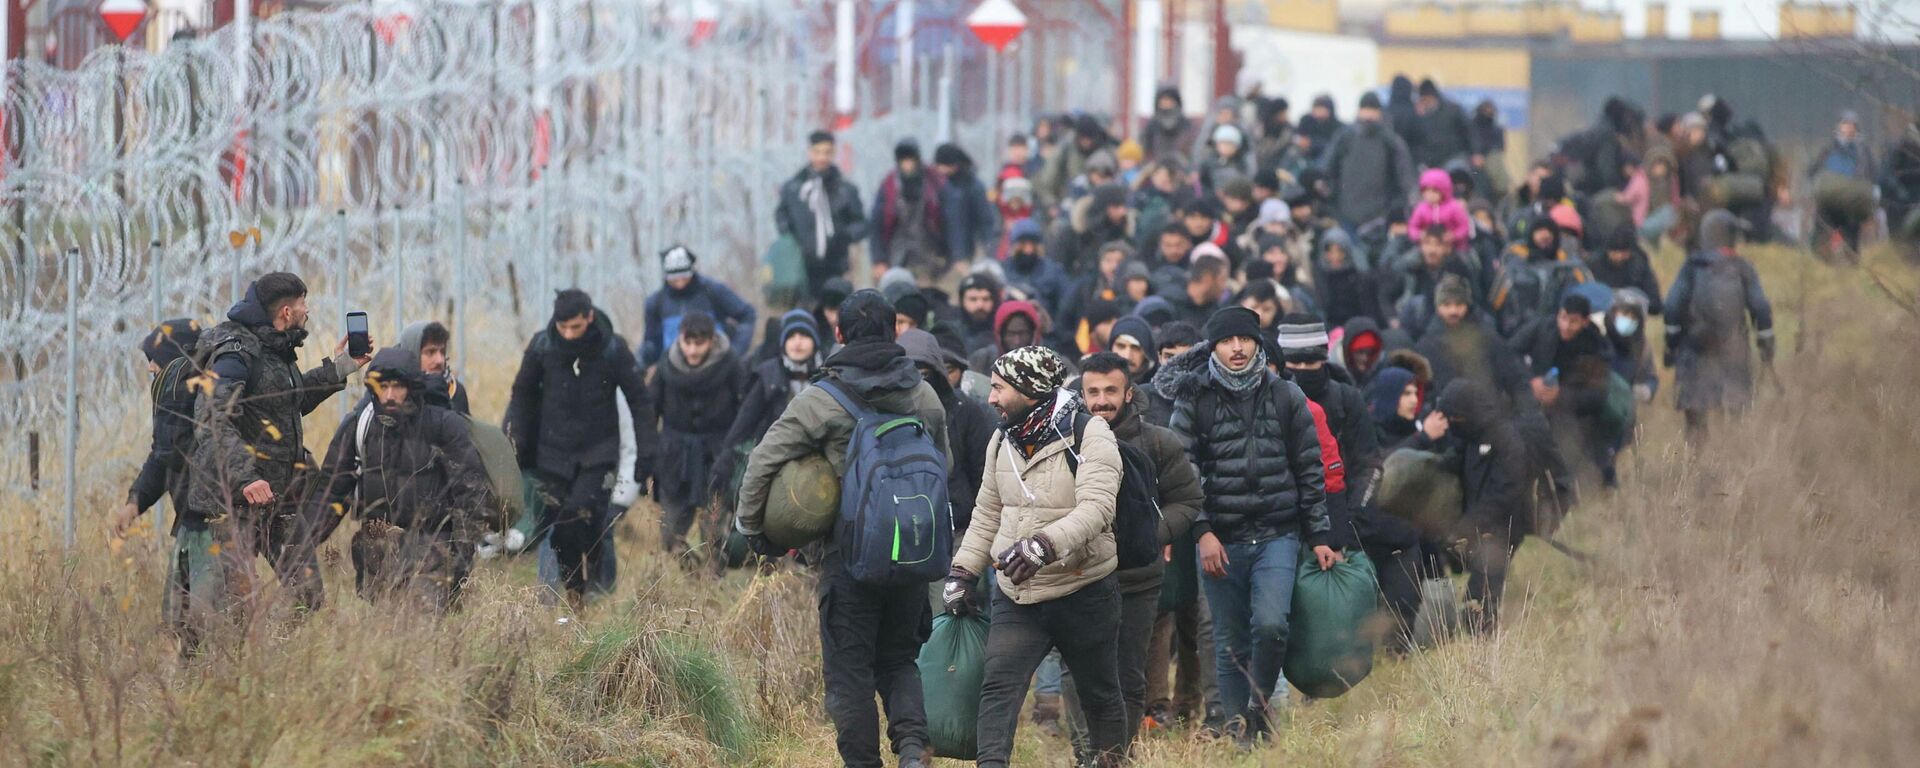 A group of migrants walk near a barbed wire fence while moving toward a makeshift camp on the Belarusian-Polish border in the Grodno region, Belarus November 12, 2021. Leonid Scheglov/BelTA/Handout via REUTERS  ATTENTION EDITORS - THIS IMAGE HAS BEEN SUPPLIED BY A THIRD PARTY. NO RESALES. NO ARCHIVE. MANDATORY CREDIT. - Sputnik International, 1920, 18.11.2021